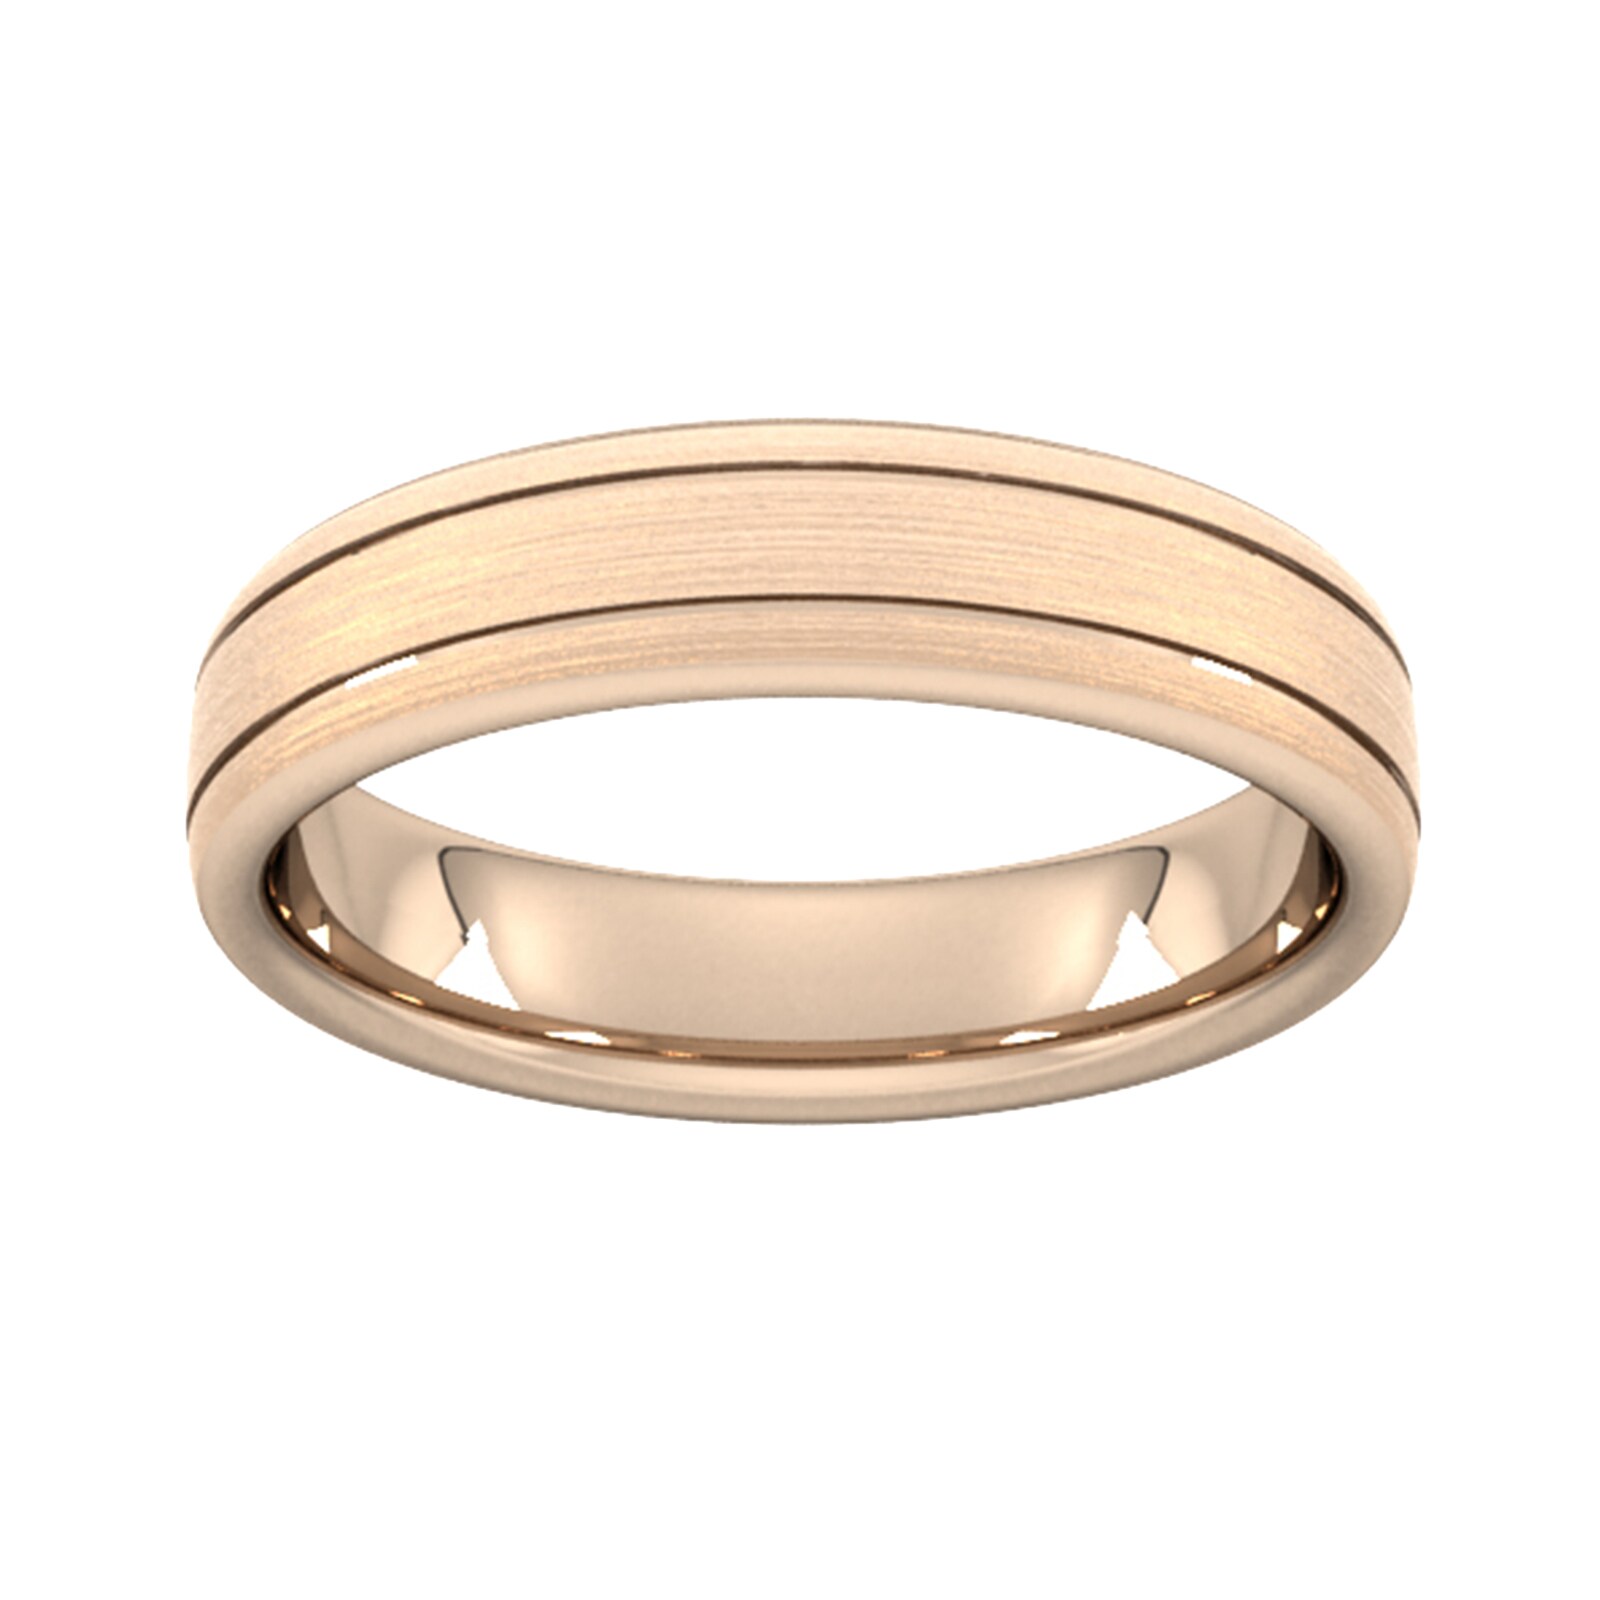 5mm D Shape Standard Matt Finish With Double Grooves Wedding Ring In 18 Carat Rose Gold - Ring Size U